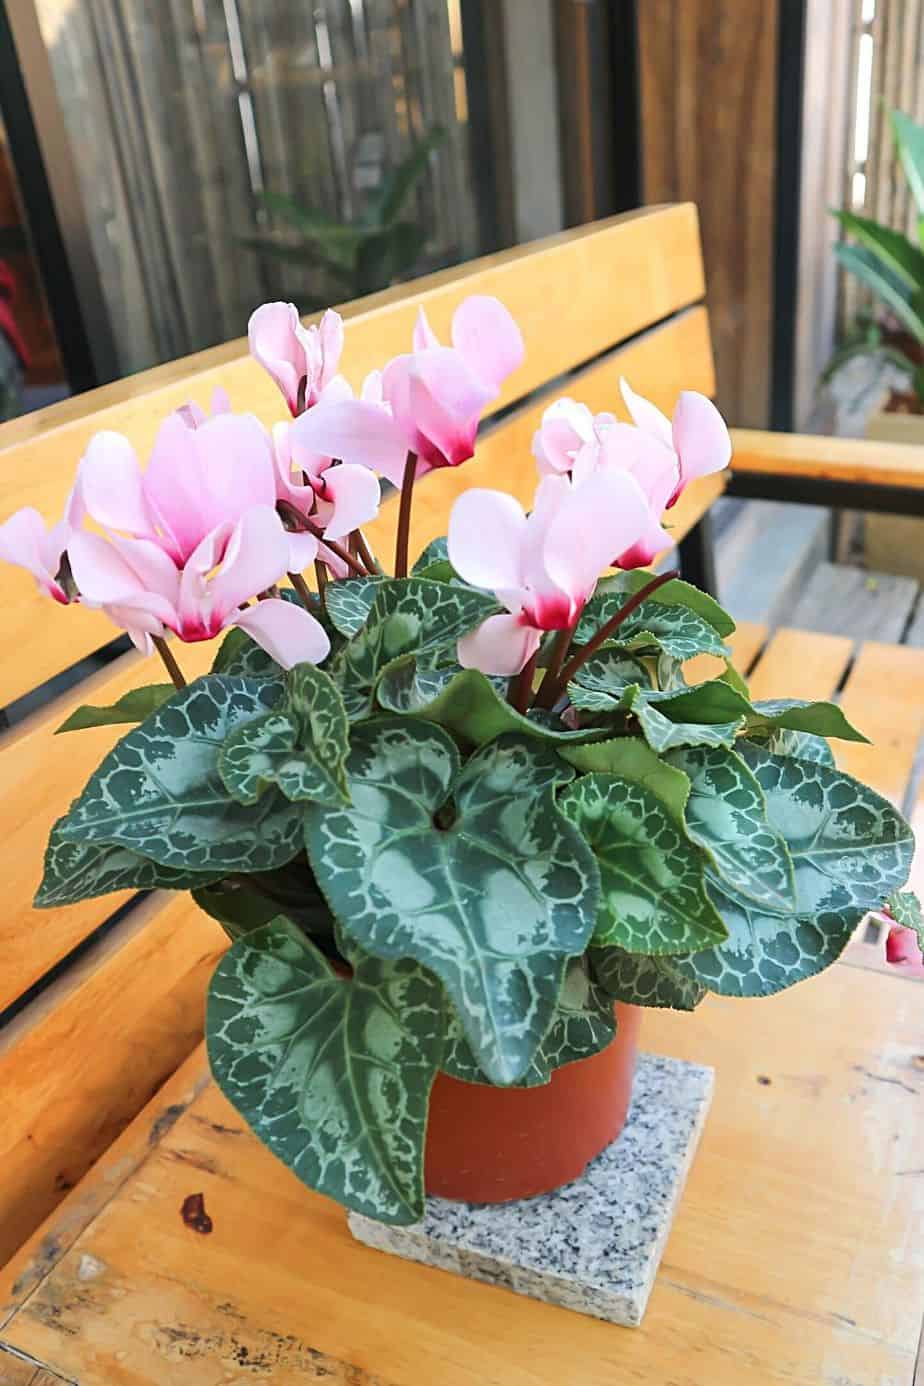 If you're looking for an exotic plant to grow by your northeast-facing window, Cyclamen is one of your best choices